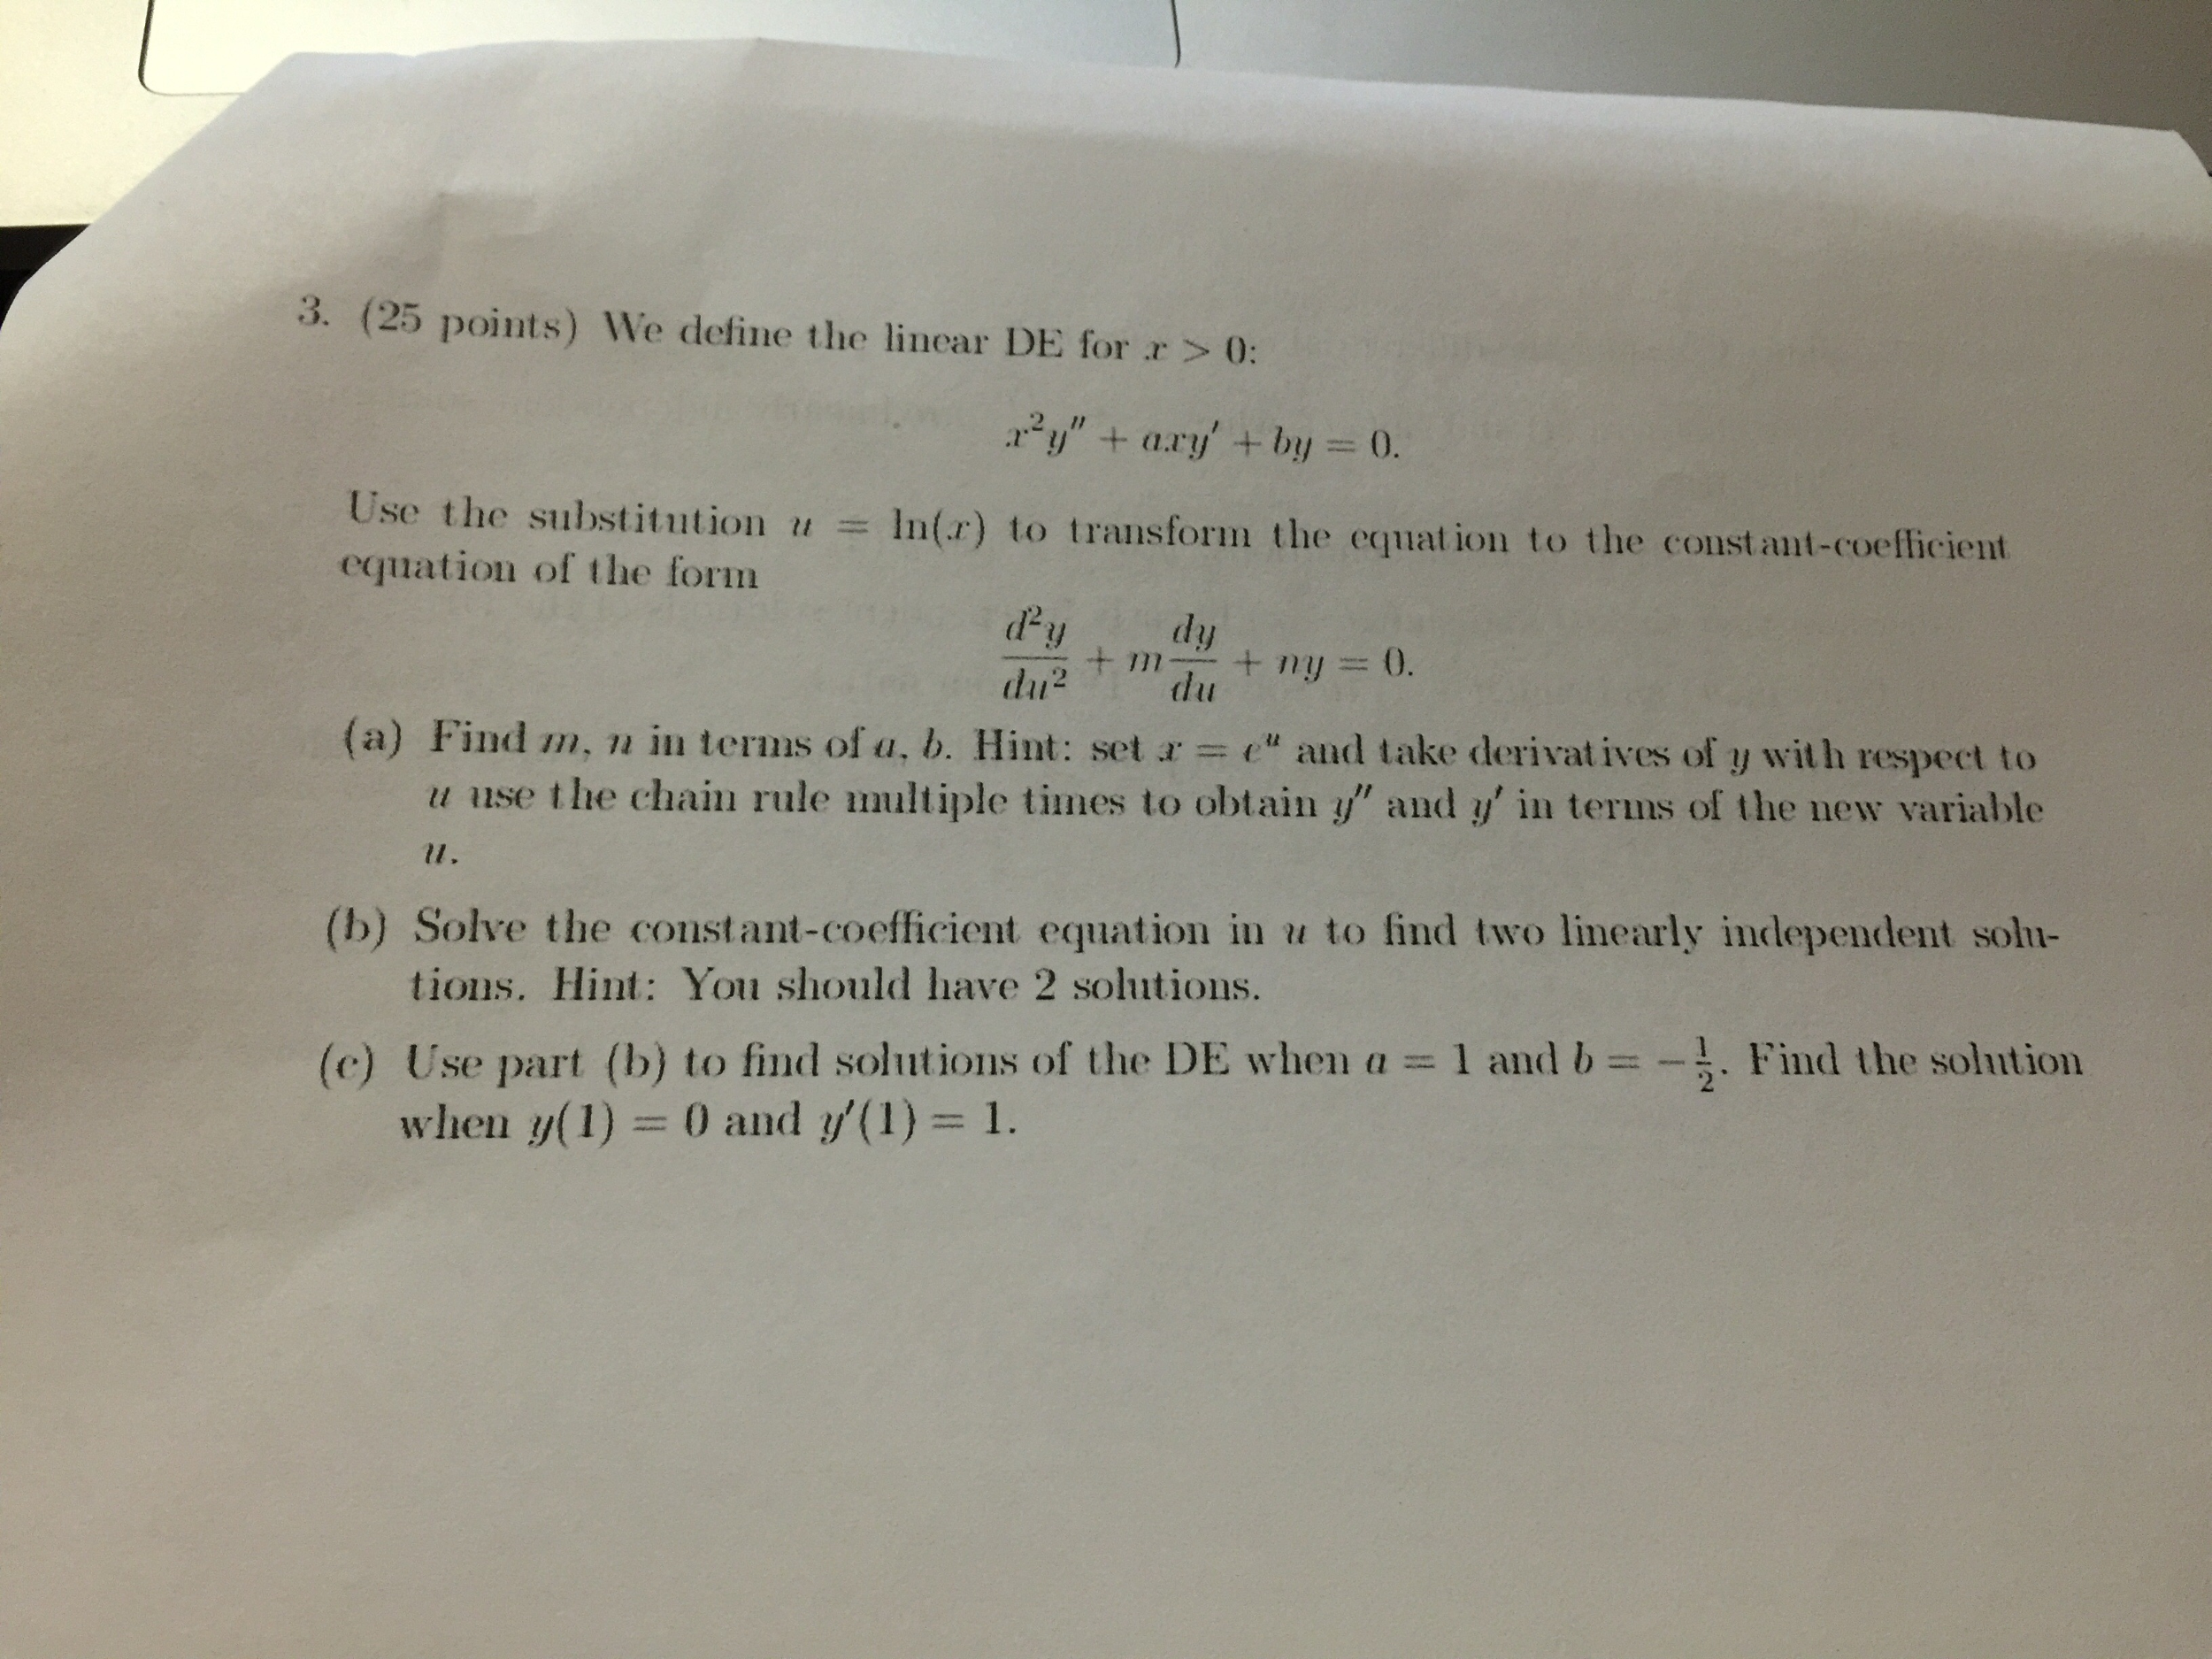 explain equivalence relation with the help of one example